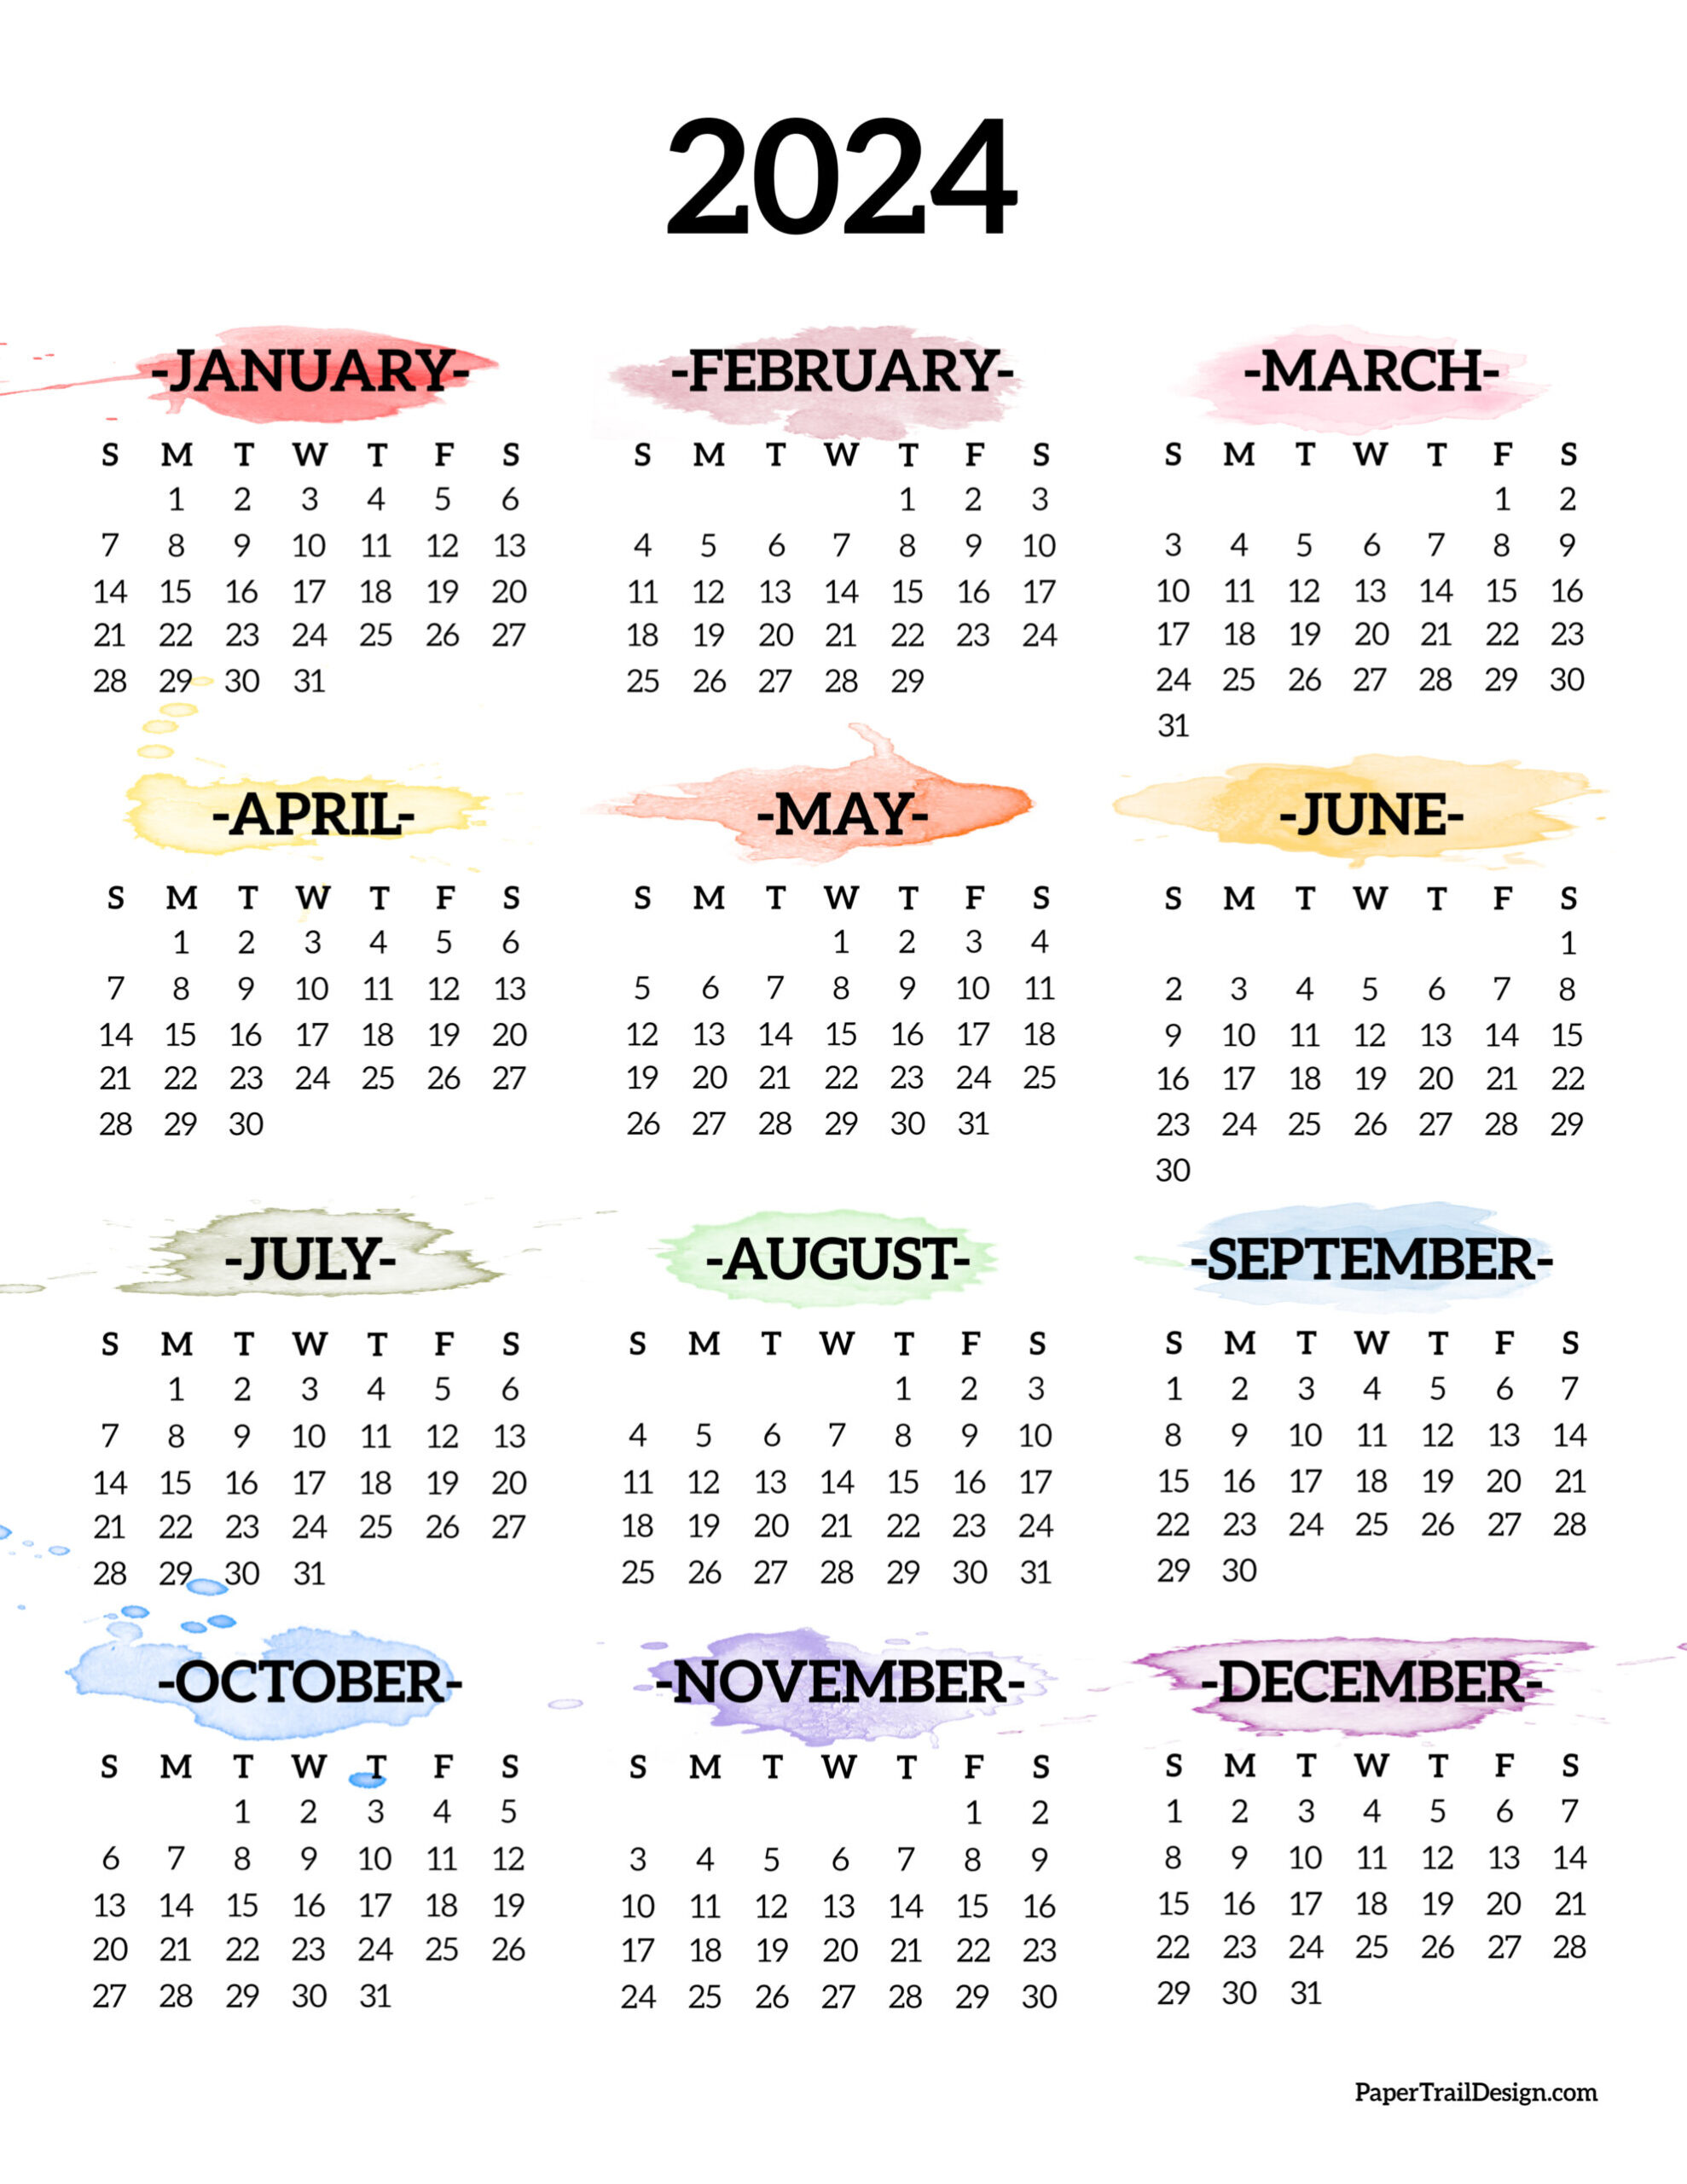 Calendar 2024 Printable One Page - Paper Trail Design for Printable 2024 Calendar One Page